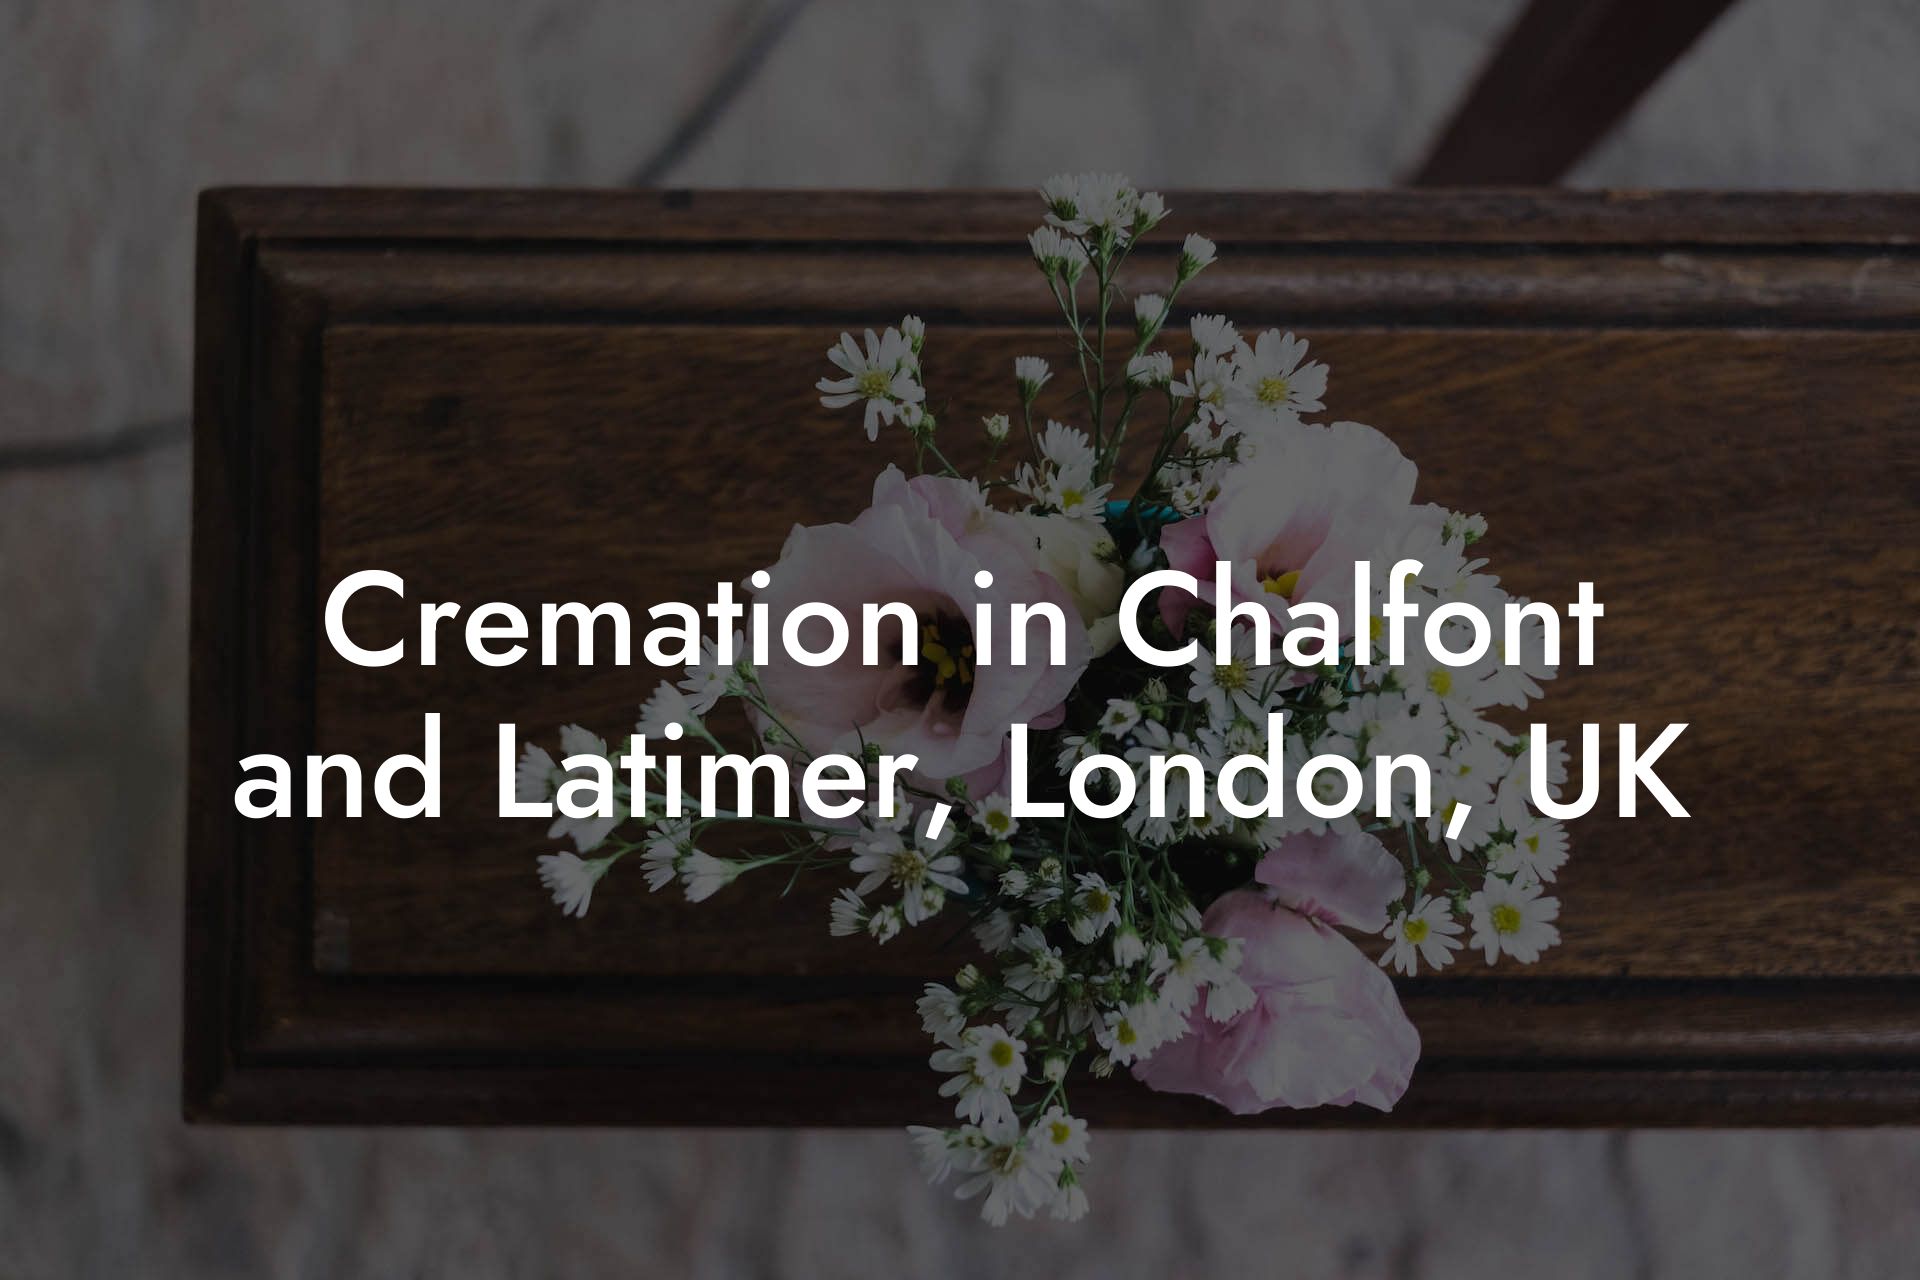 Cremation in Chalfont and Latimer, London, UK